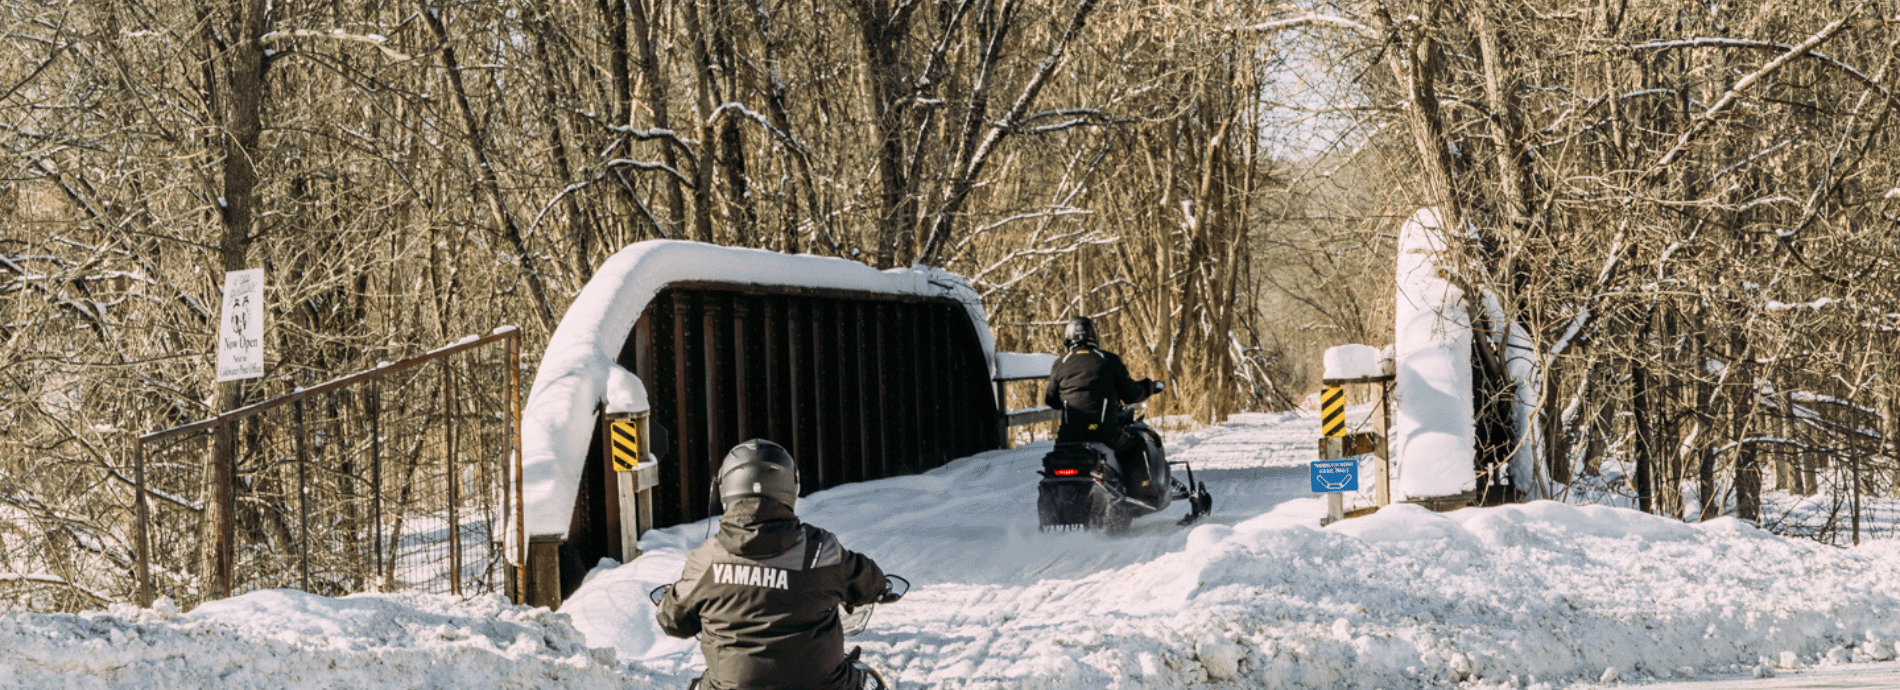 snowmobiles crossing a road